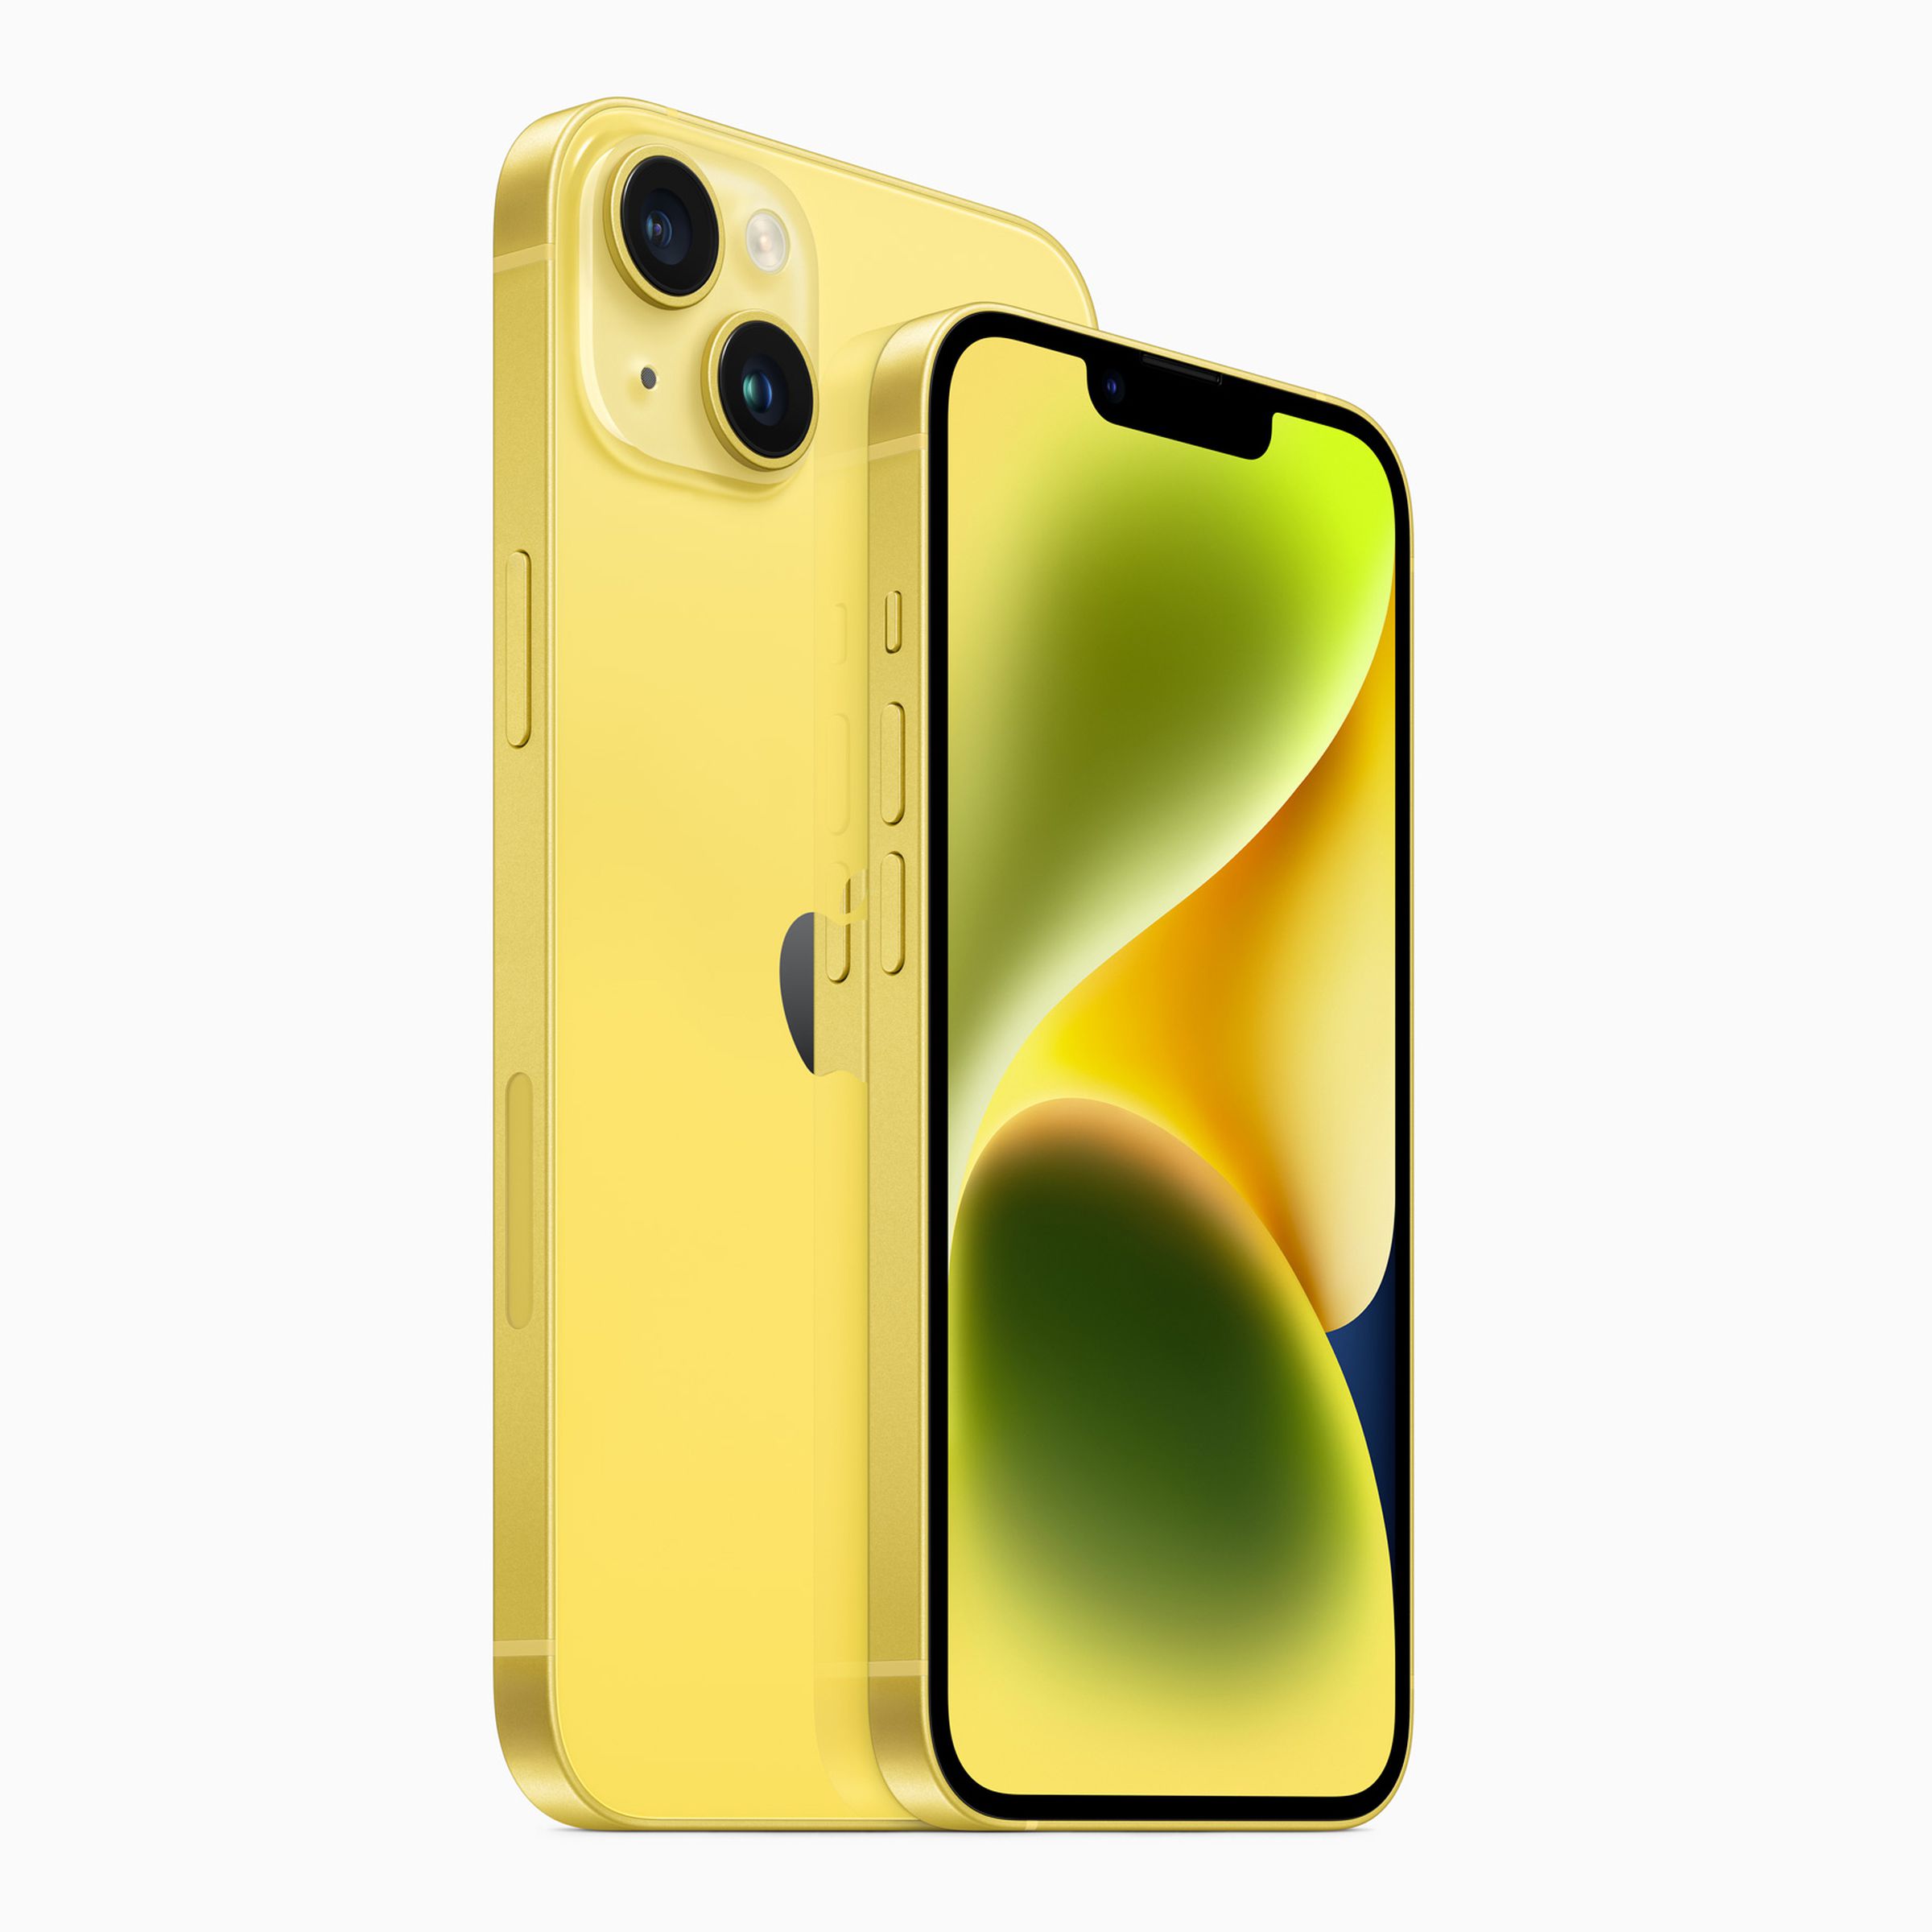 Image showing a yellow iPhone 14